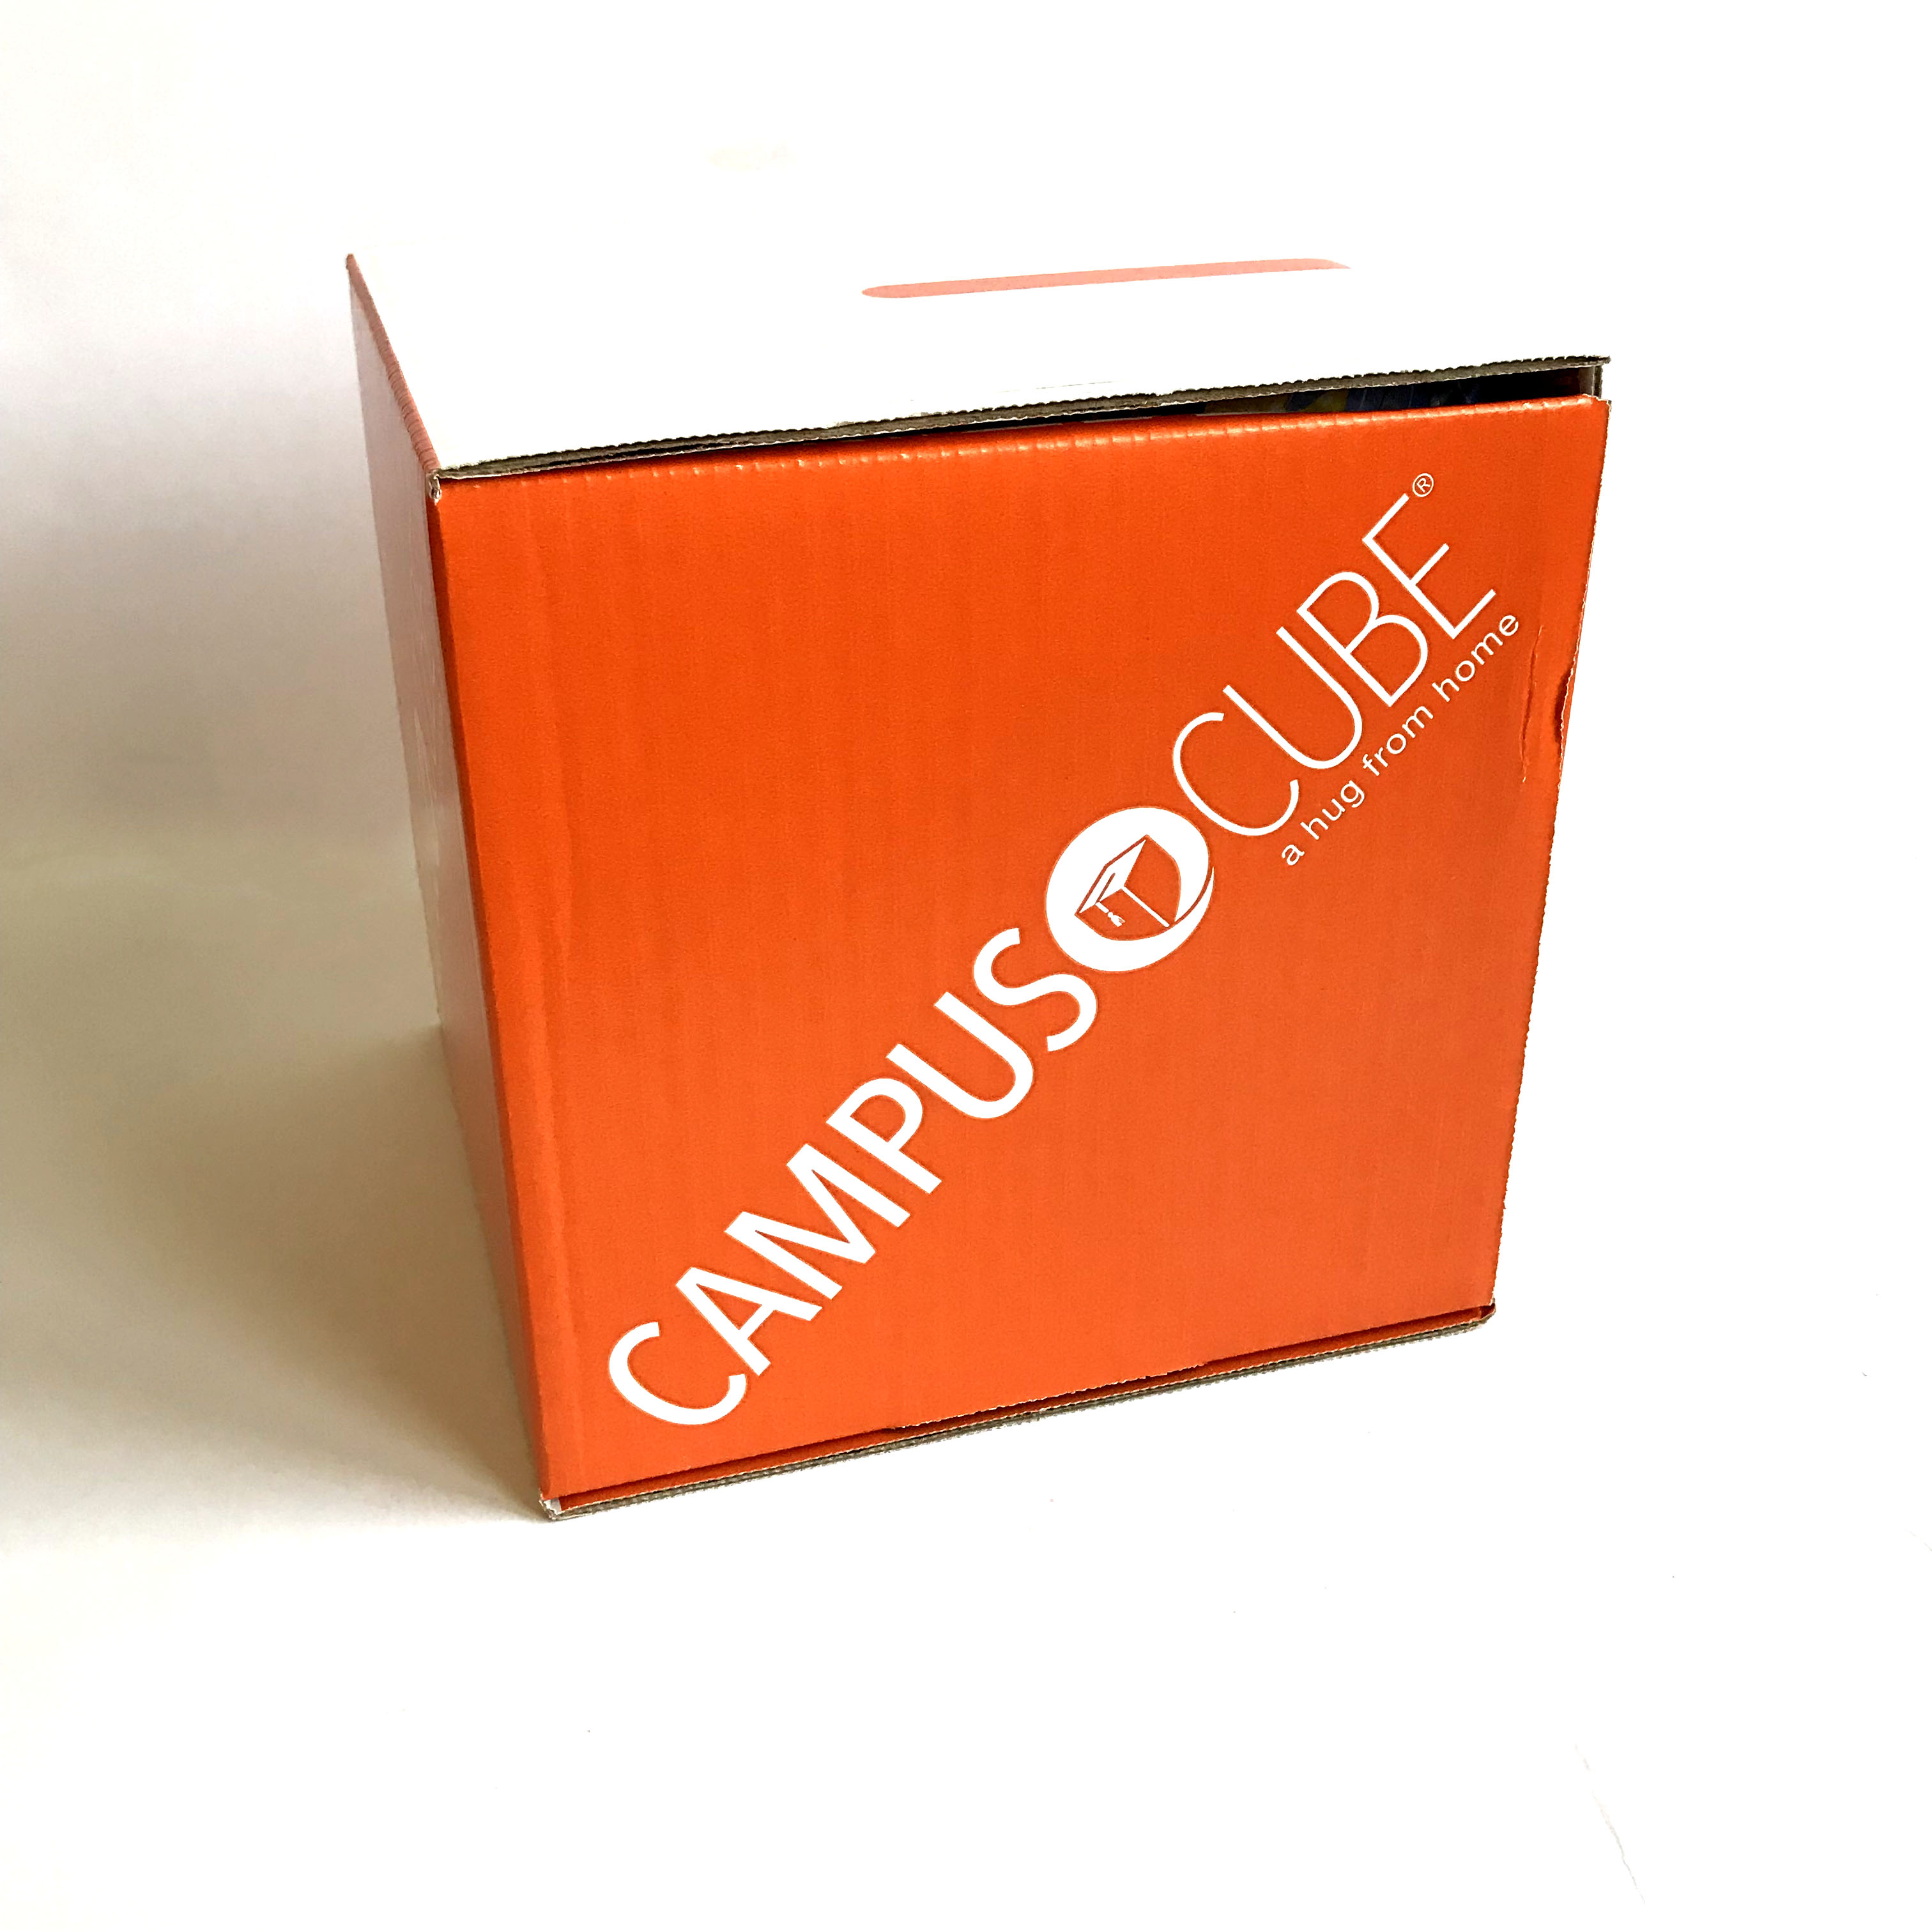 CampusCube for Girls “Bloom” Care Package Review + Coupon